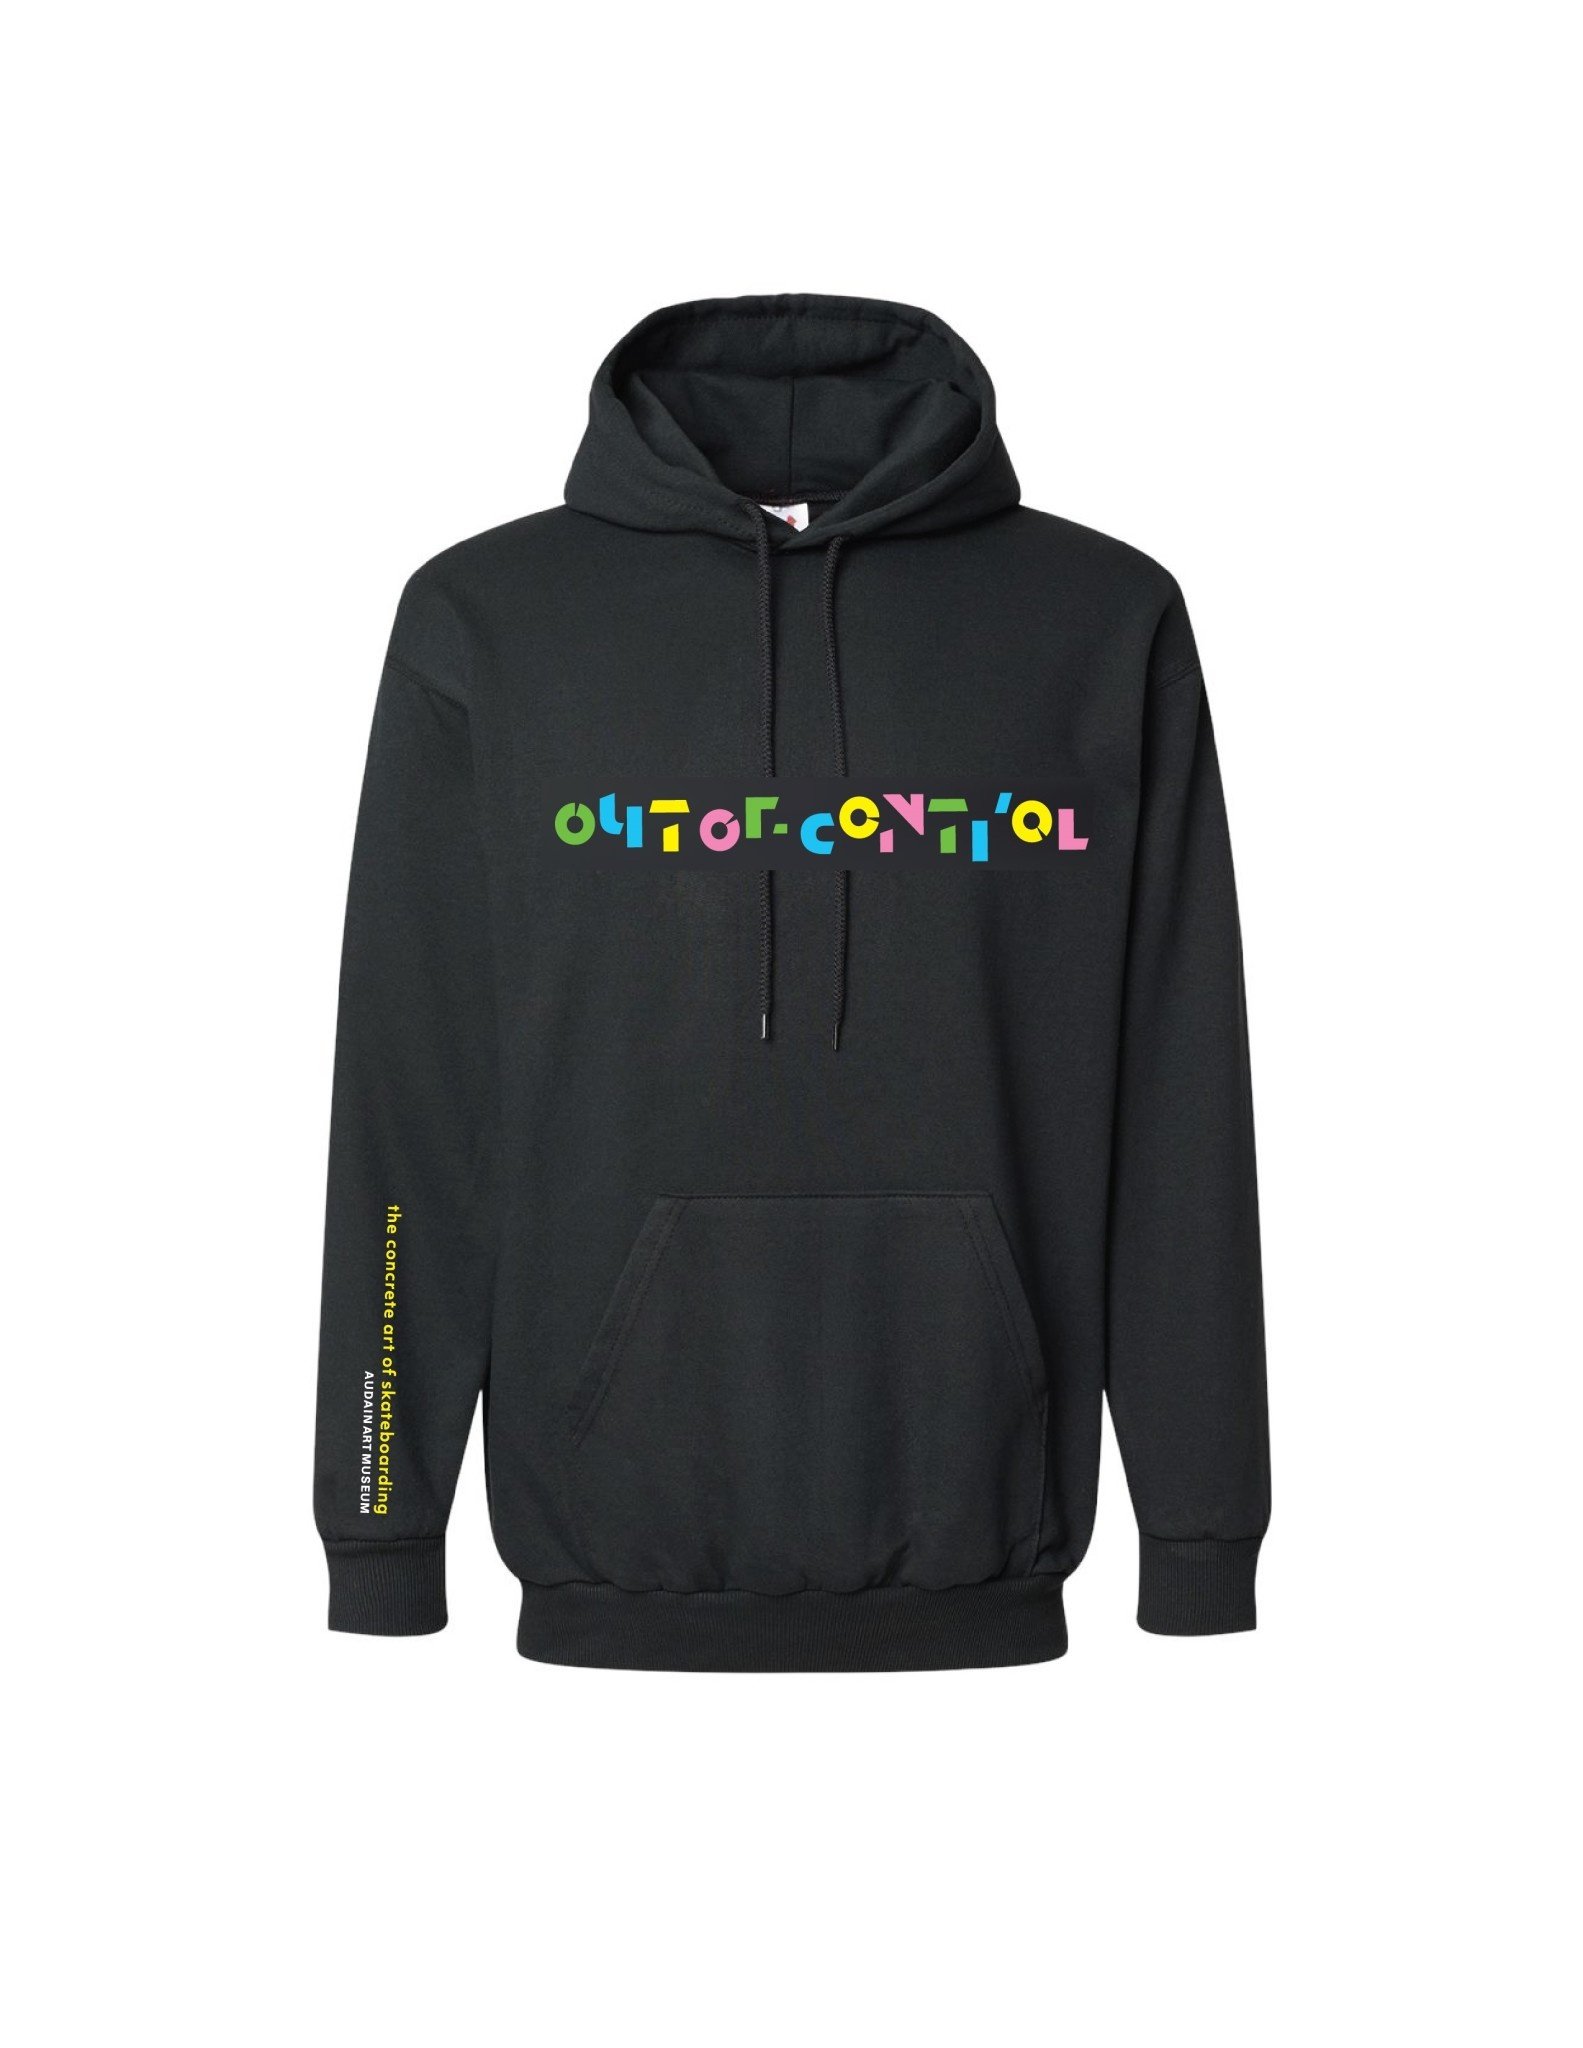 Out of Control Hoodie